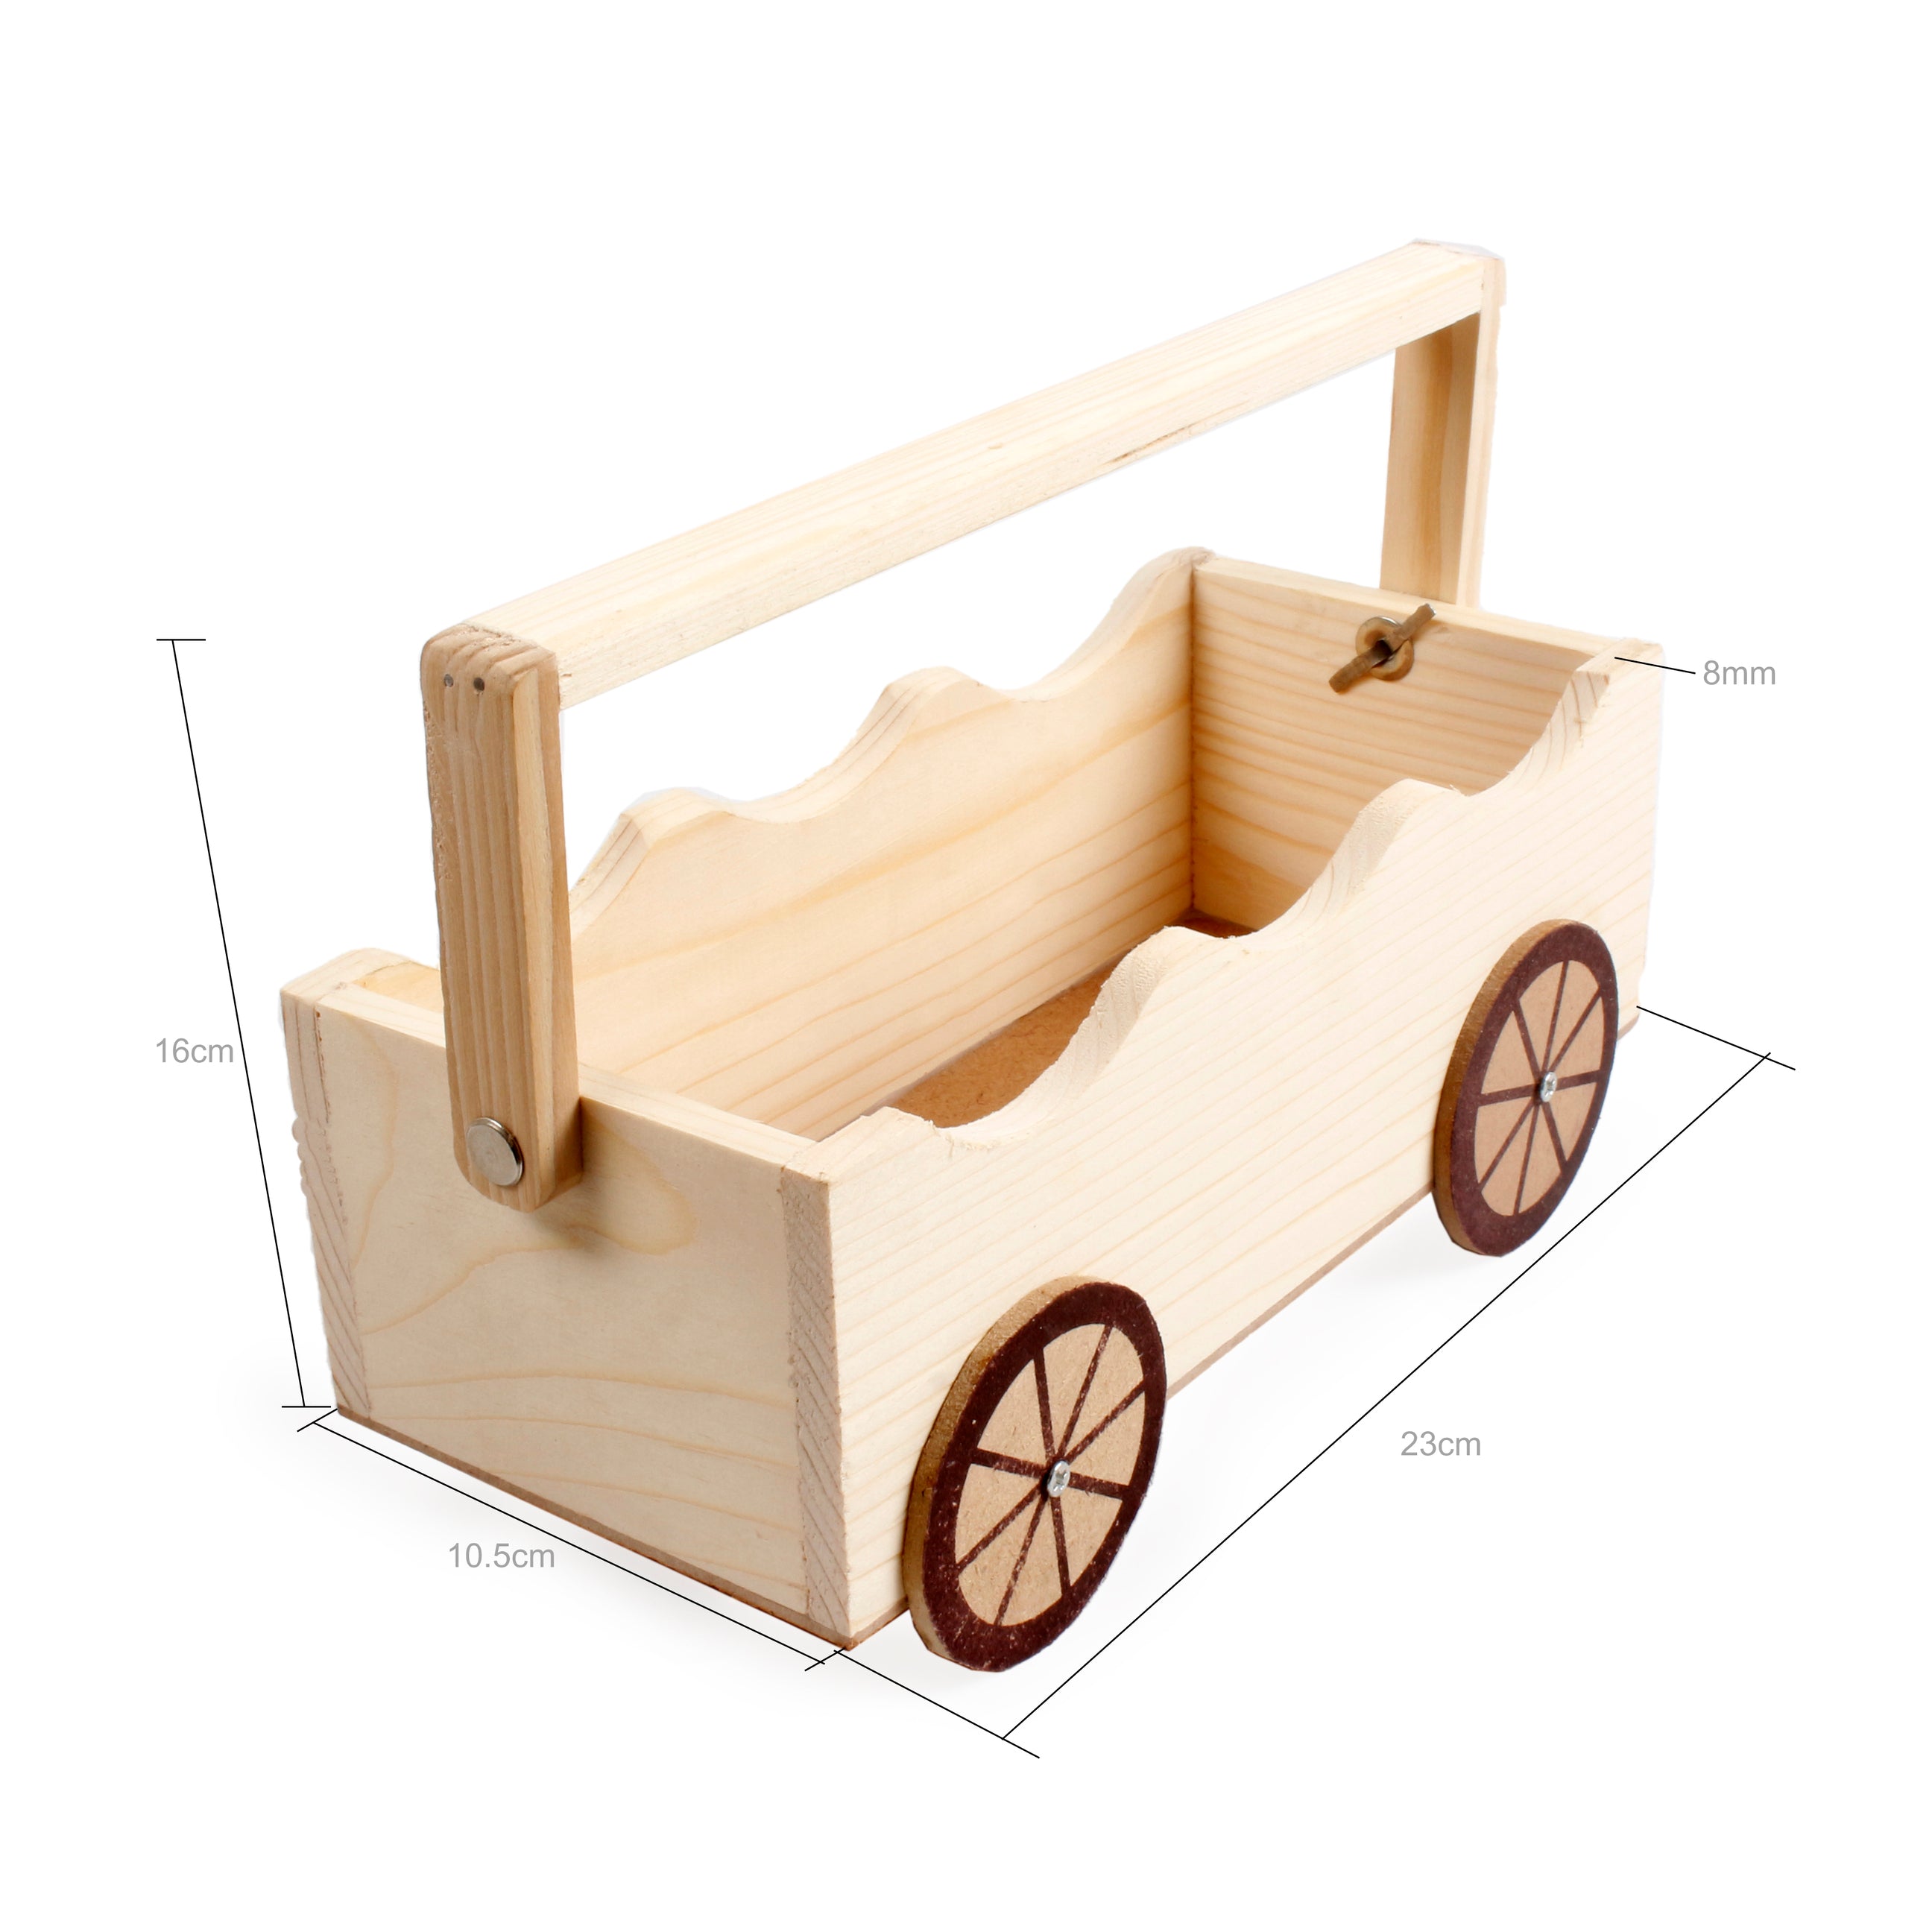 Wooden Cart Storage Tray With Moveable Wheels 4 X 9 X 3Inch 1Pc Ib